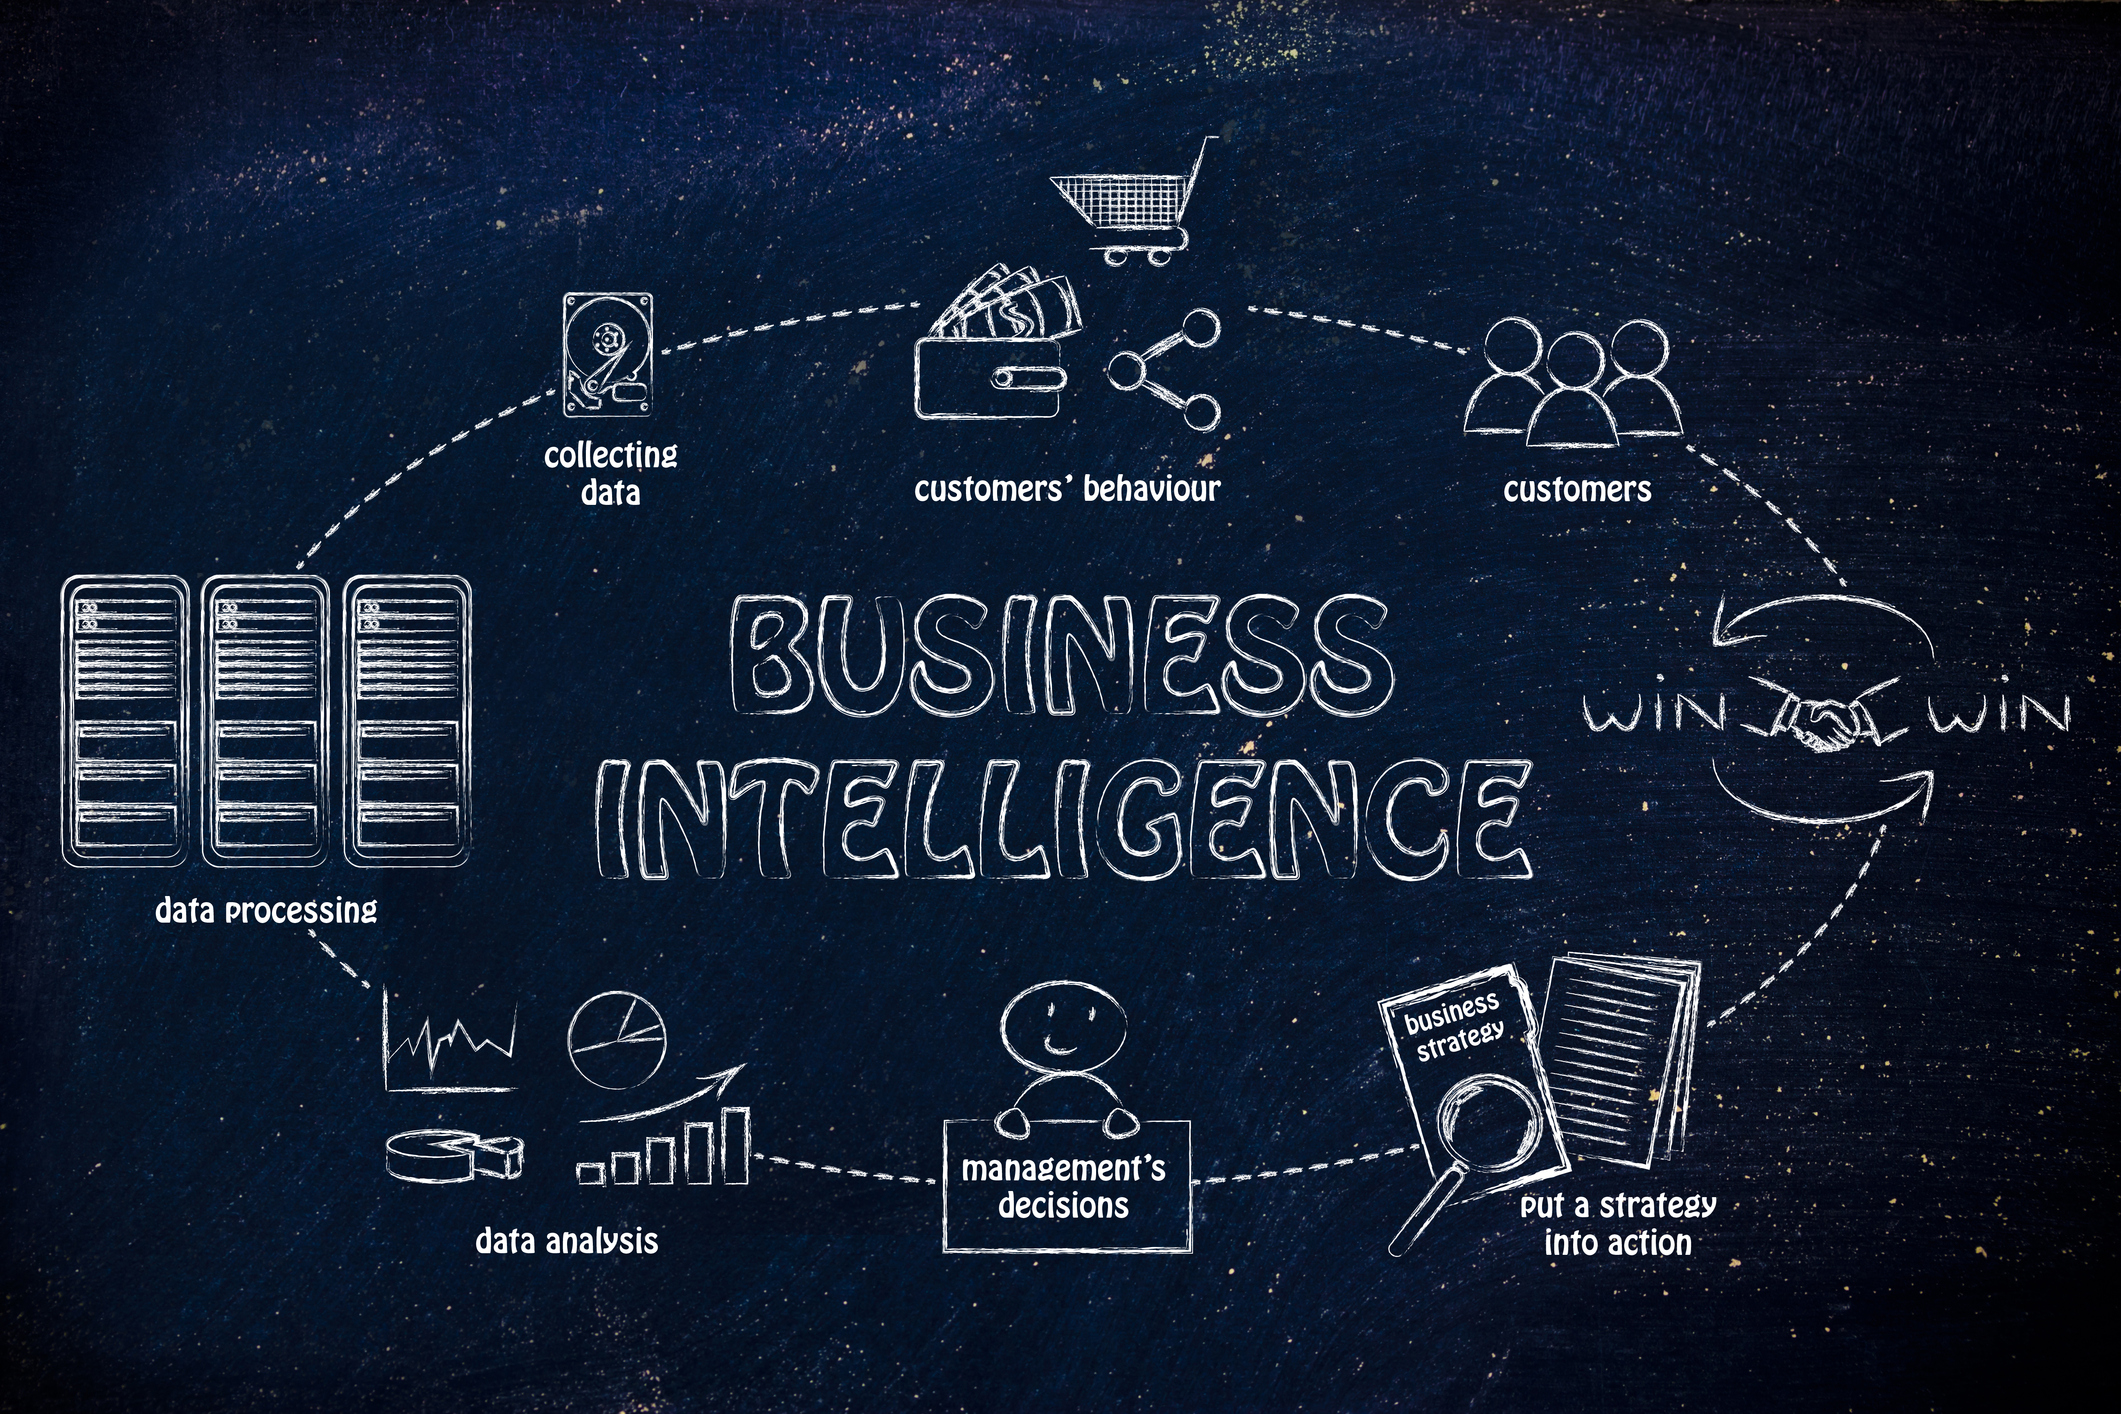 business intelligence: the steps from collecting customer data to win-win solutions for the business